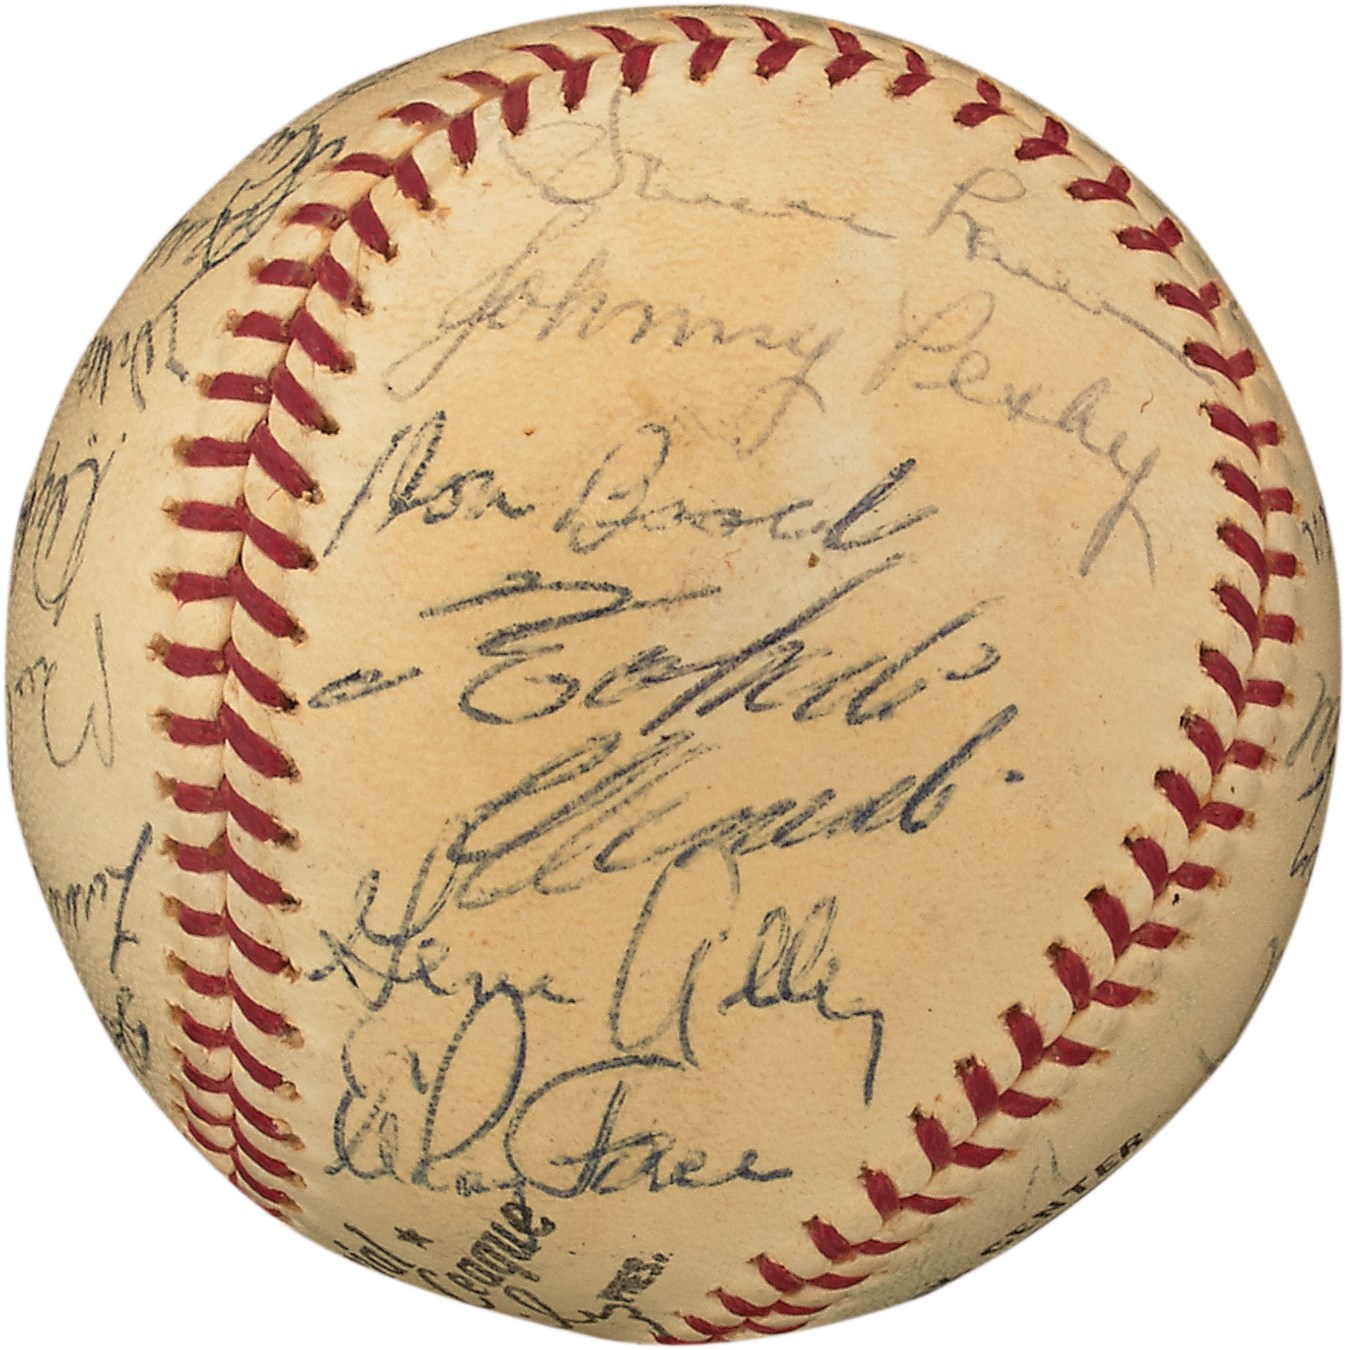 Clemente and Pittsburgh Pirates - 1966 Pittsburgh Pirates Team Signed Baseball with Roberto Clemente from MLer R. Hal Smith (PSA)